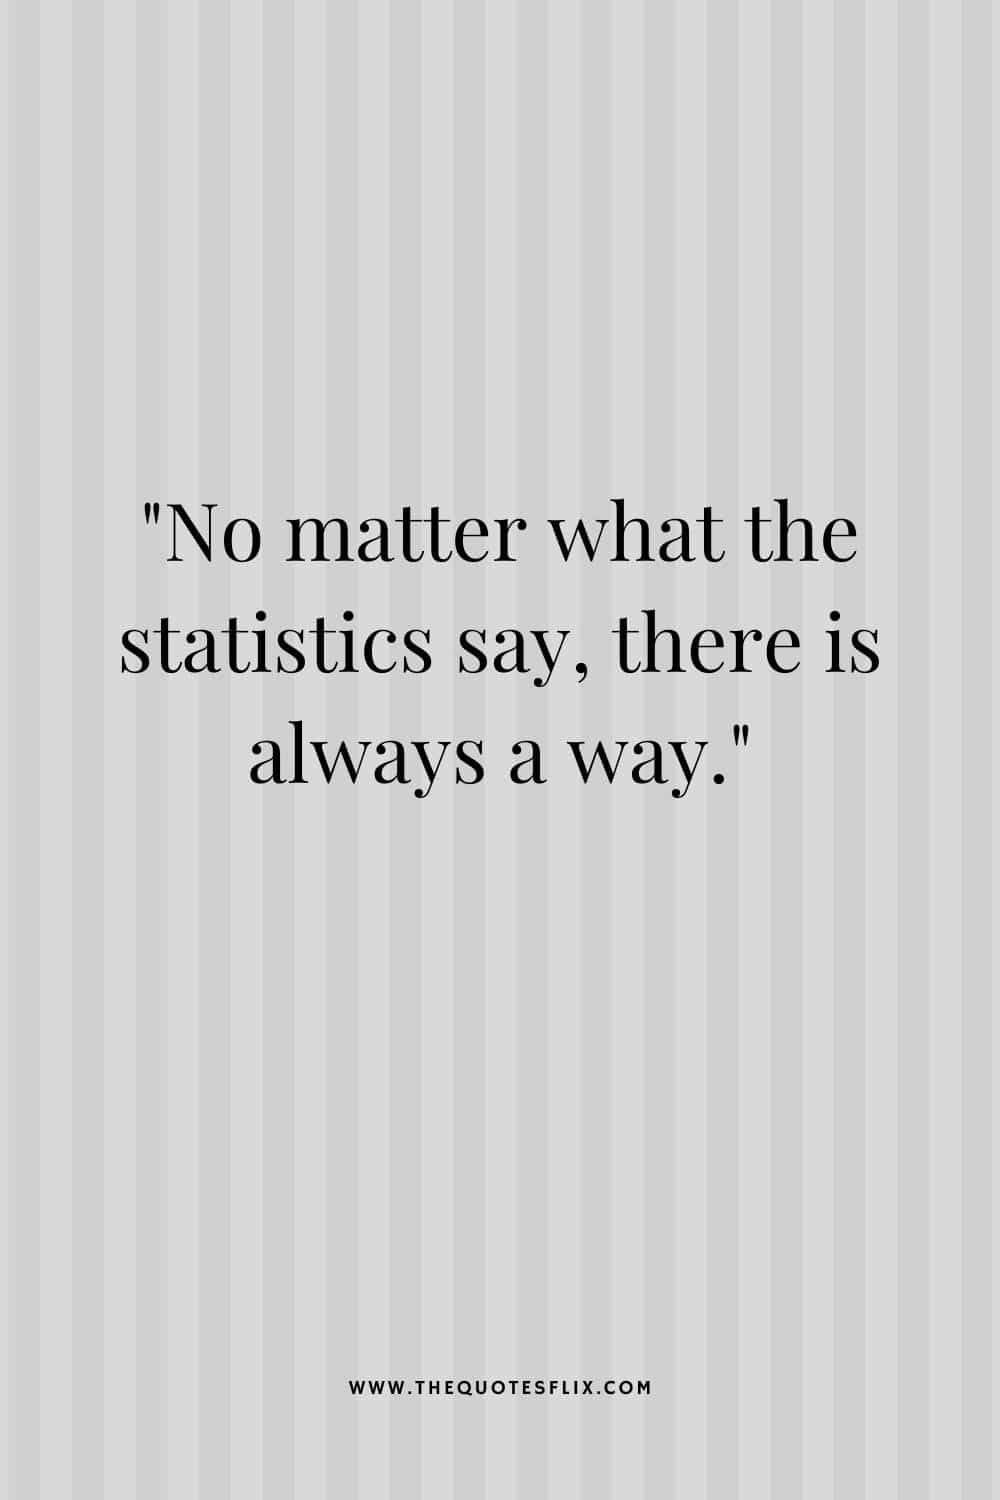 cancer survivor quotes - no matter what statistics say there a way